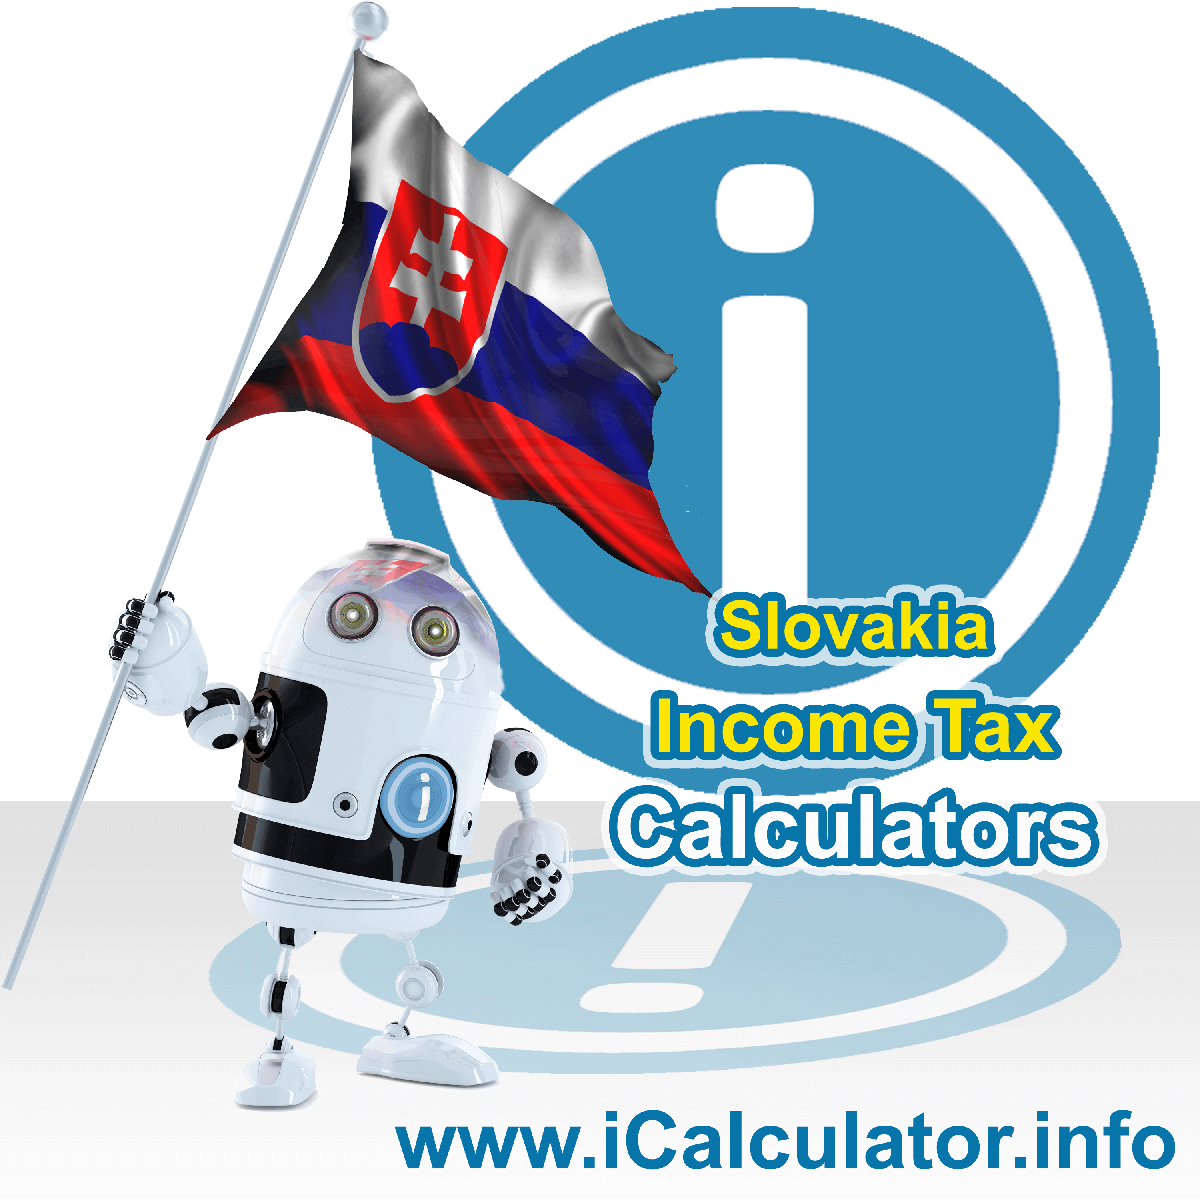 Slovakia Income Tax Calculator. This image shows a new employer in Slovakia calculating the annual payroll costs based on multiple payroll payments in one year in Slovakia using the Slovakia income tax calculator to understand their payroll costs in Slovakia in 2023